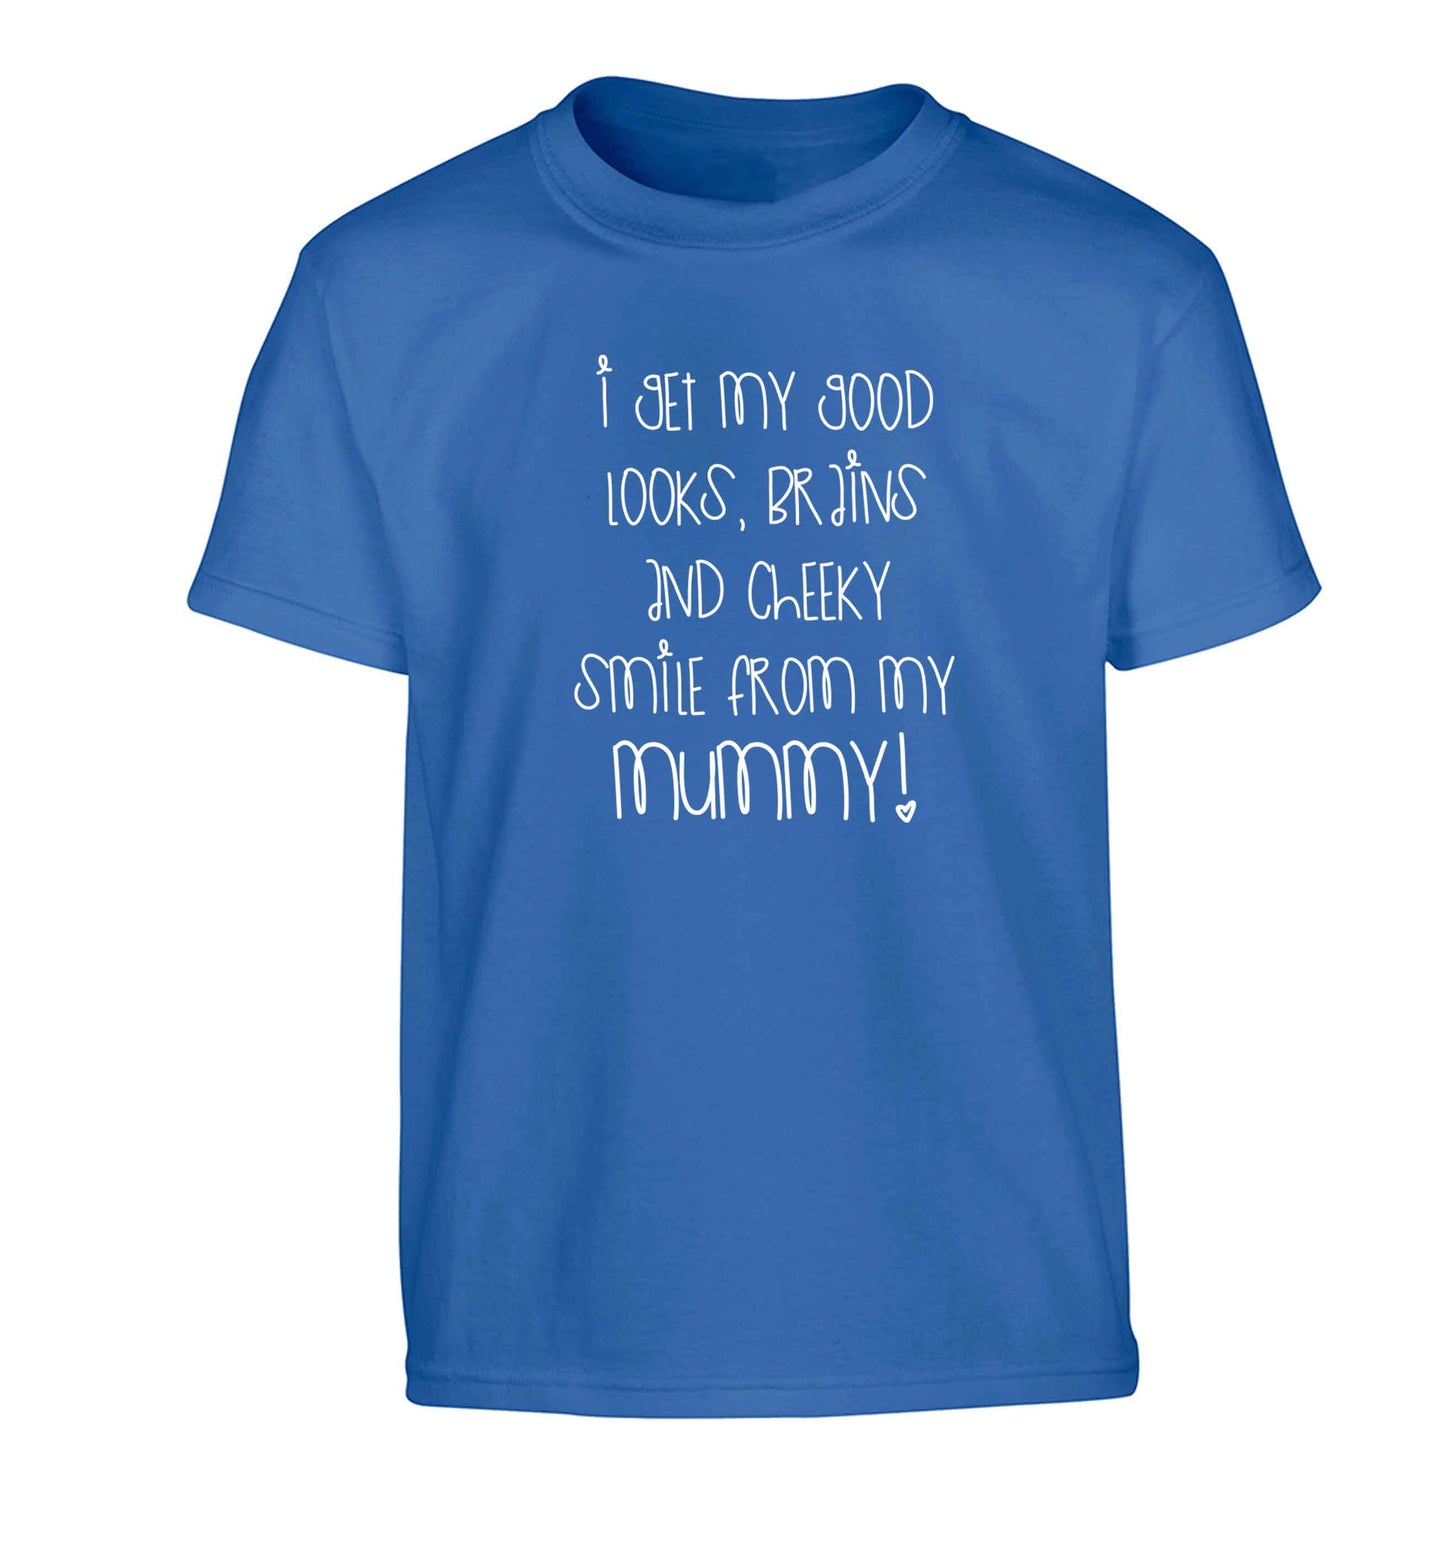 I get my good looks, brains and cheeky smile from my mummy Children's blue Tshirt 12-13 Years